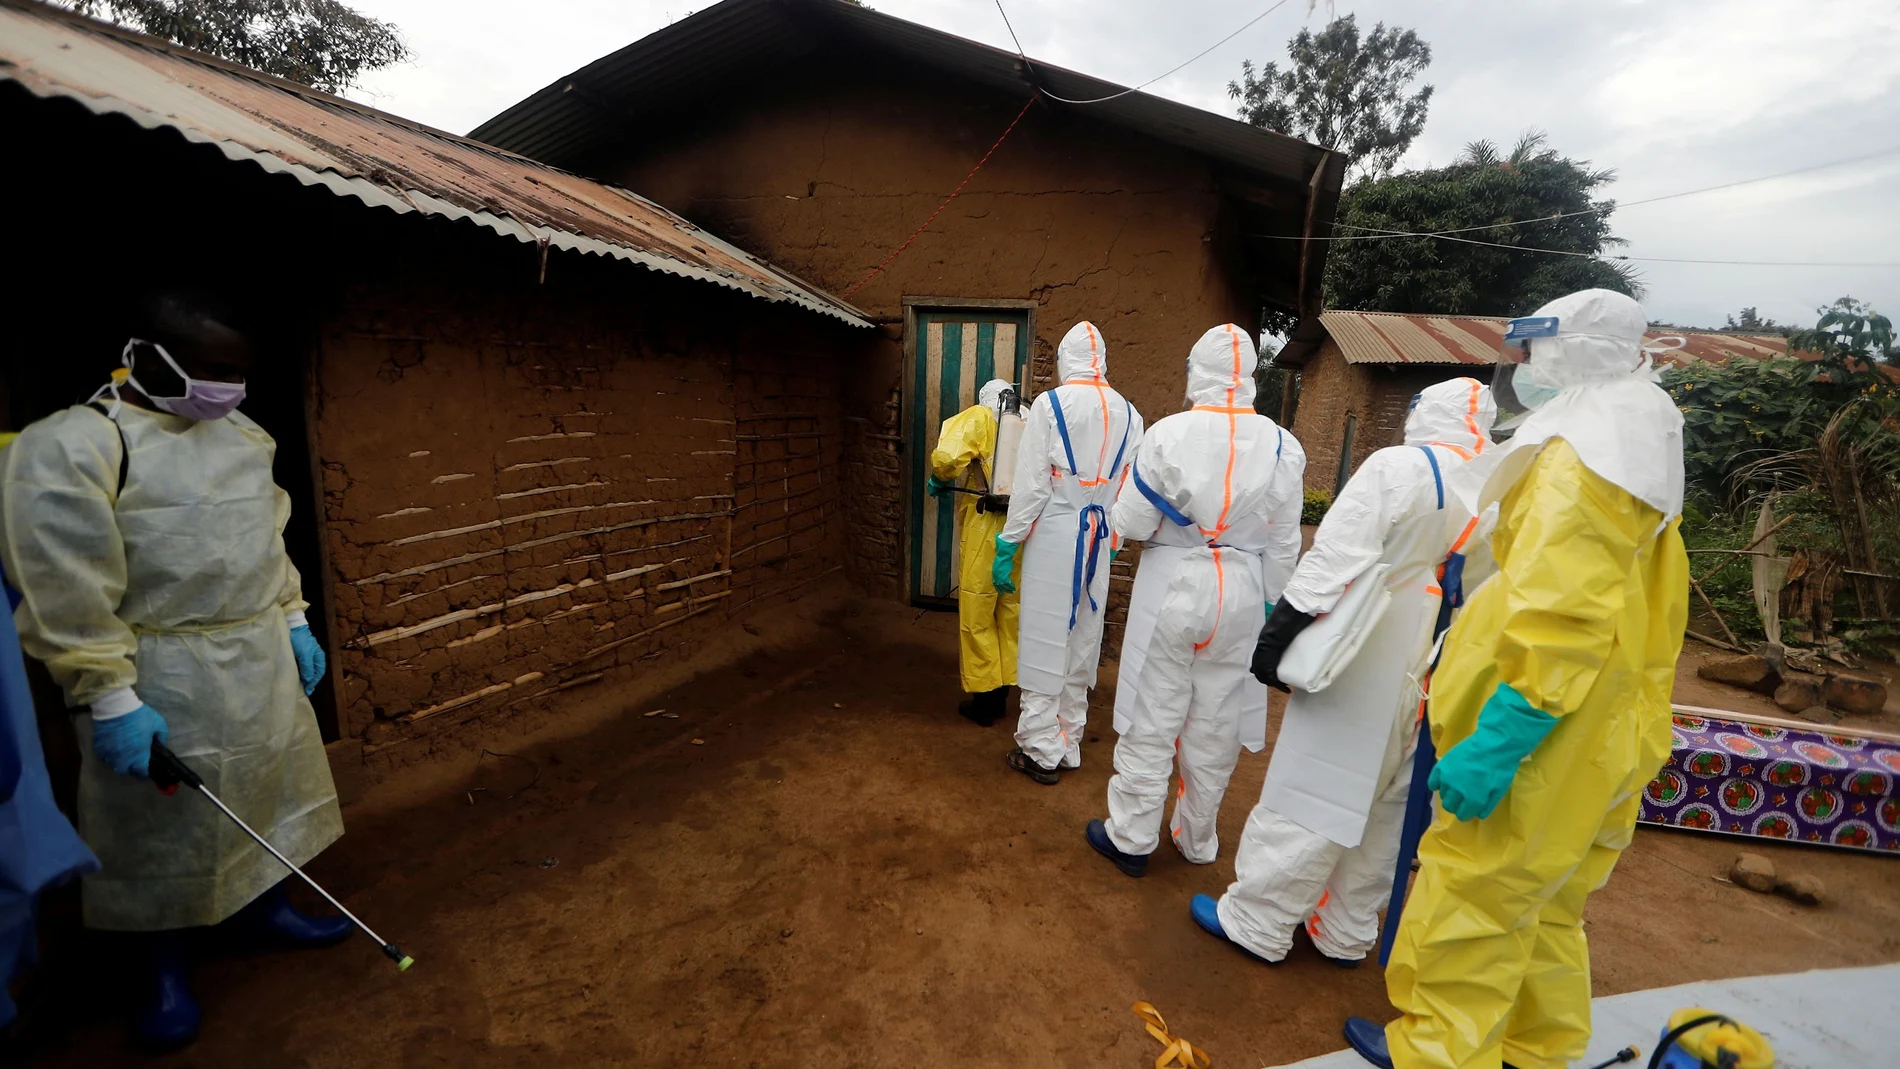 FILE PHOTO: Kavota Mugisha Robert (L), a healthcare worker who volunteered in the Ebola response, stands with decontamination gear as his colleague prepare to enter a house where a woman, 85, is suspected of dying of Ebola in the Eastern Congolese town of